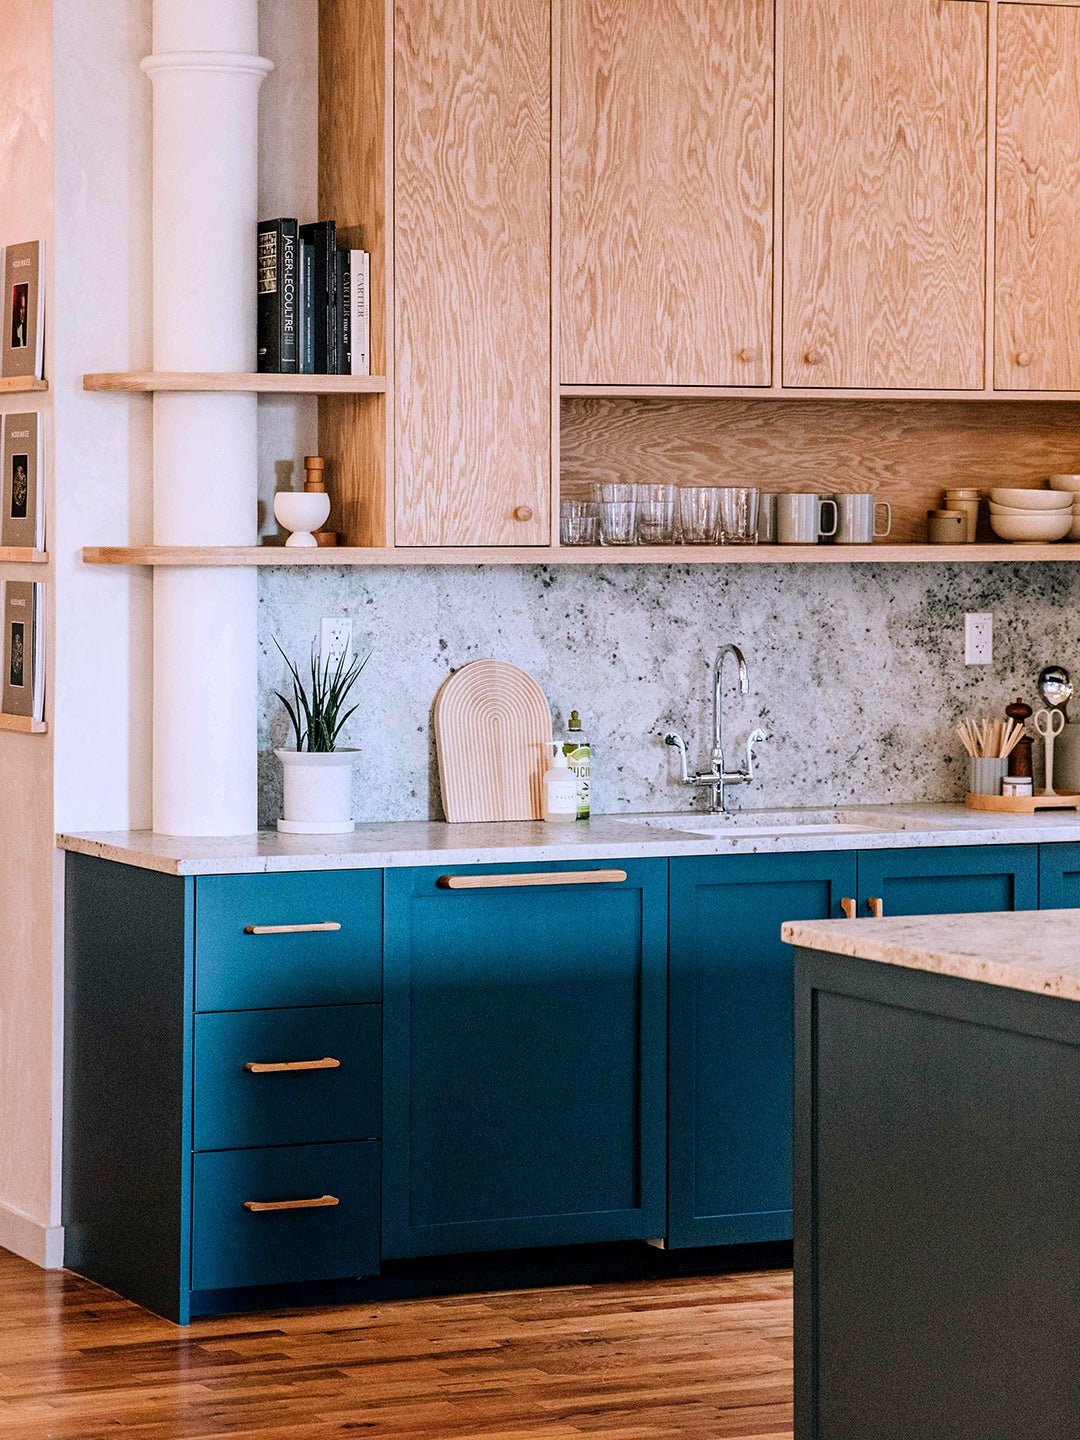 A Pesky Column Became the Star of This Kitchen’s Open Shelving